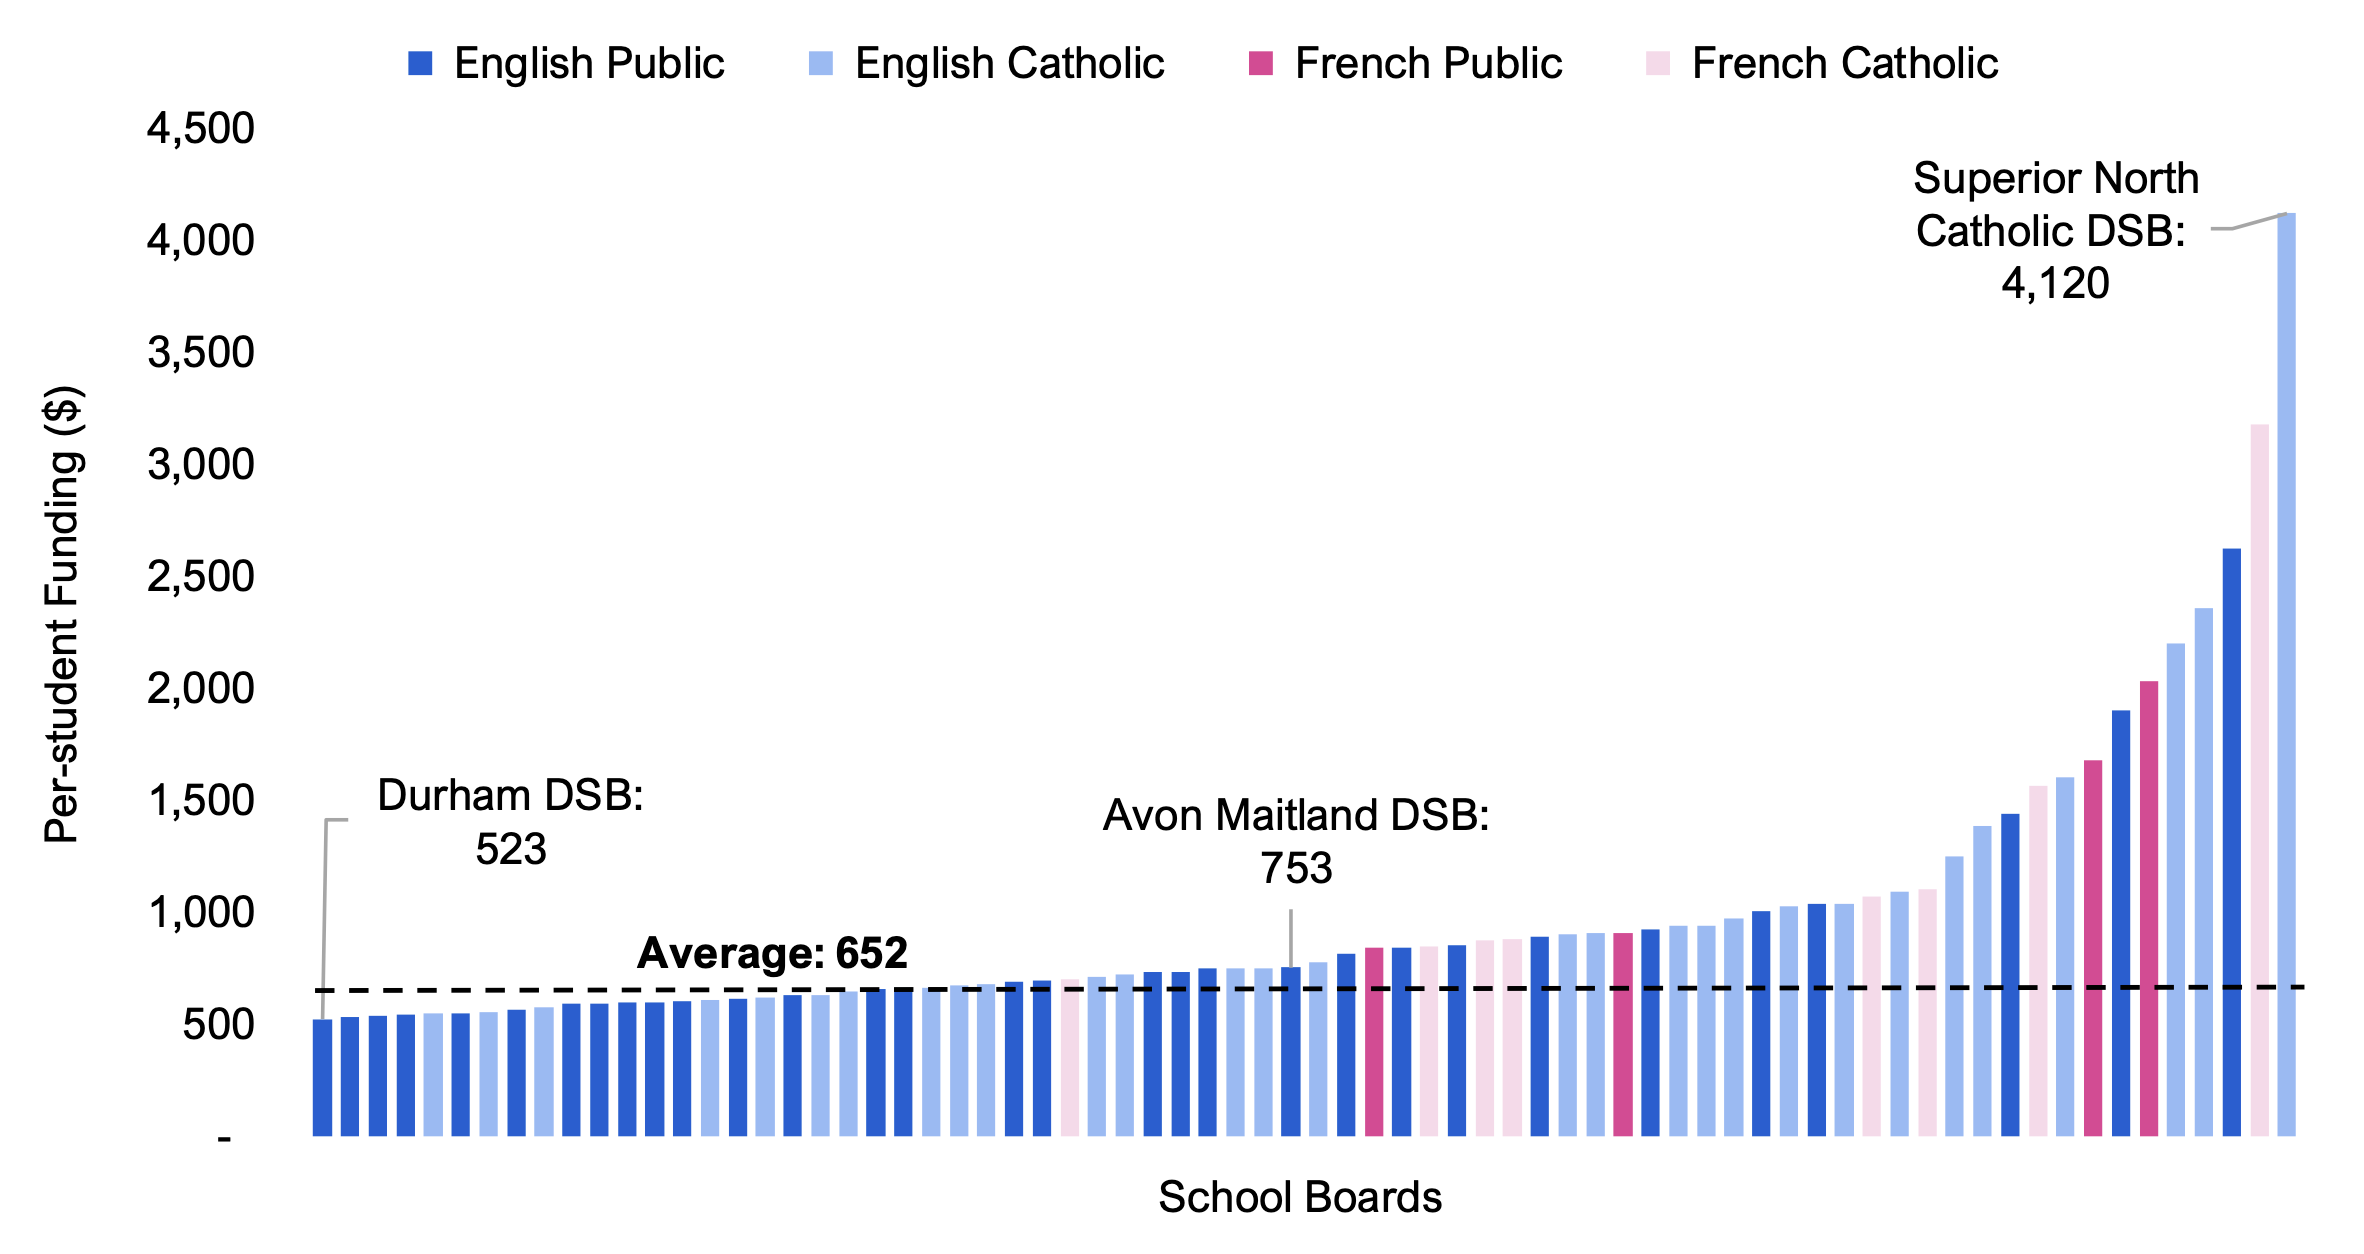 Figure 4.9 shows per-student Priorities and Partnership Fund (PPF) funding by school board, broken down by school system. The values range from a low of $523 for the Durham DSB to a high of $4,120 for the Superior North Catholic DSB, with an overall average of $652. On average, French Catholic and French Public school boards received higher per-student PPF funding than English Public and English Catholic school boards.